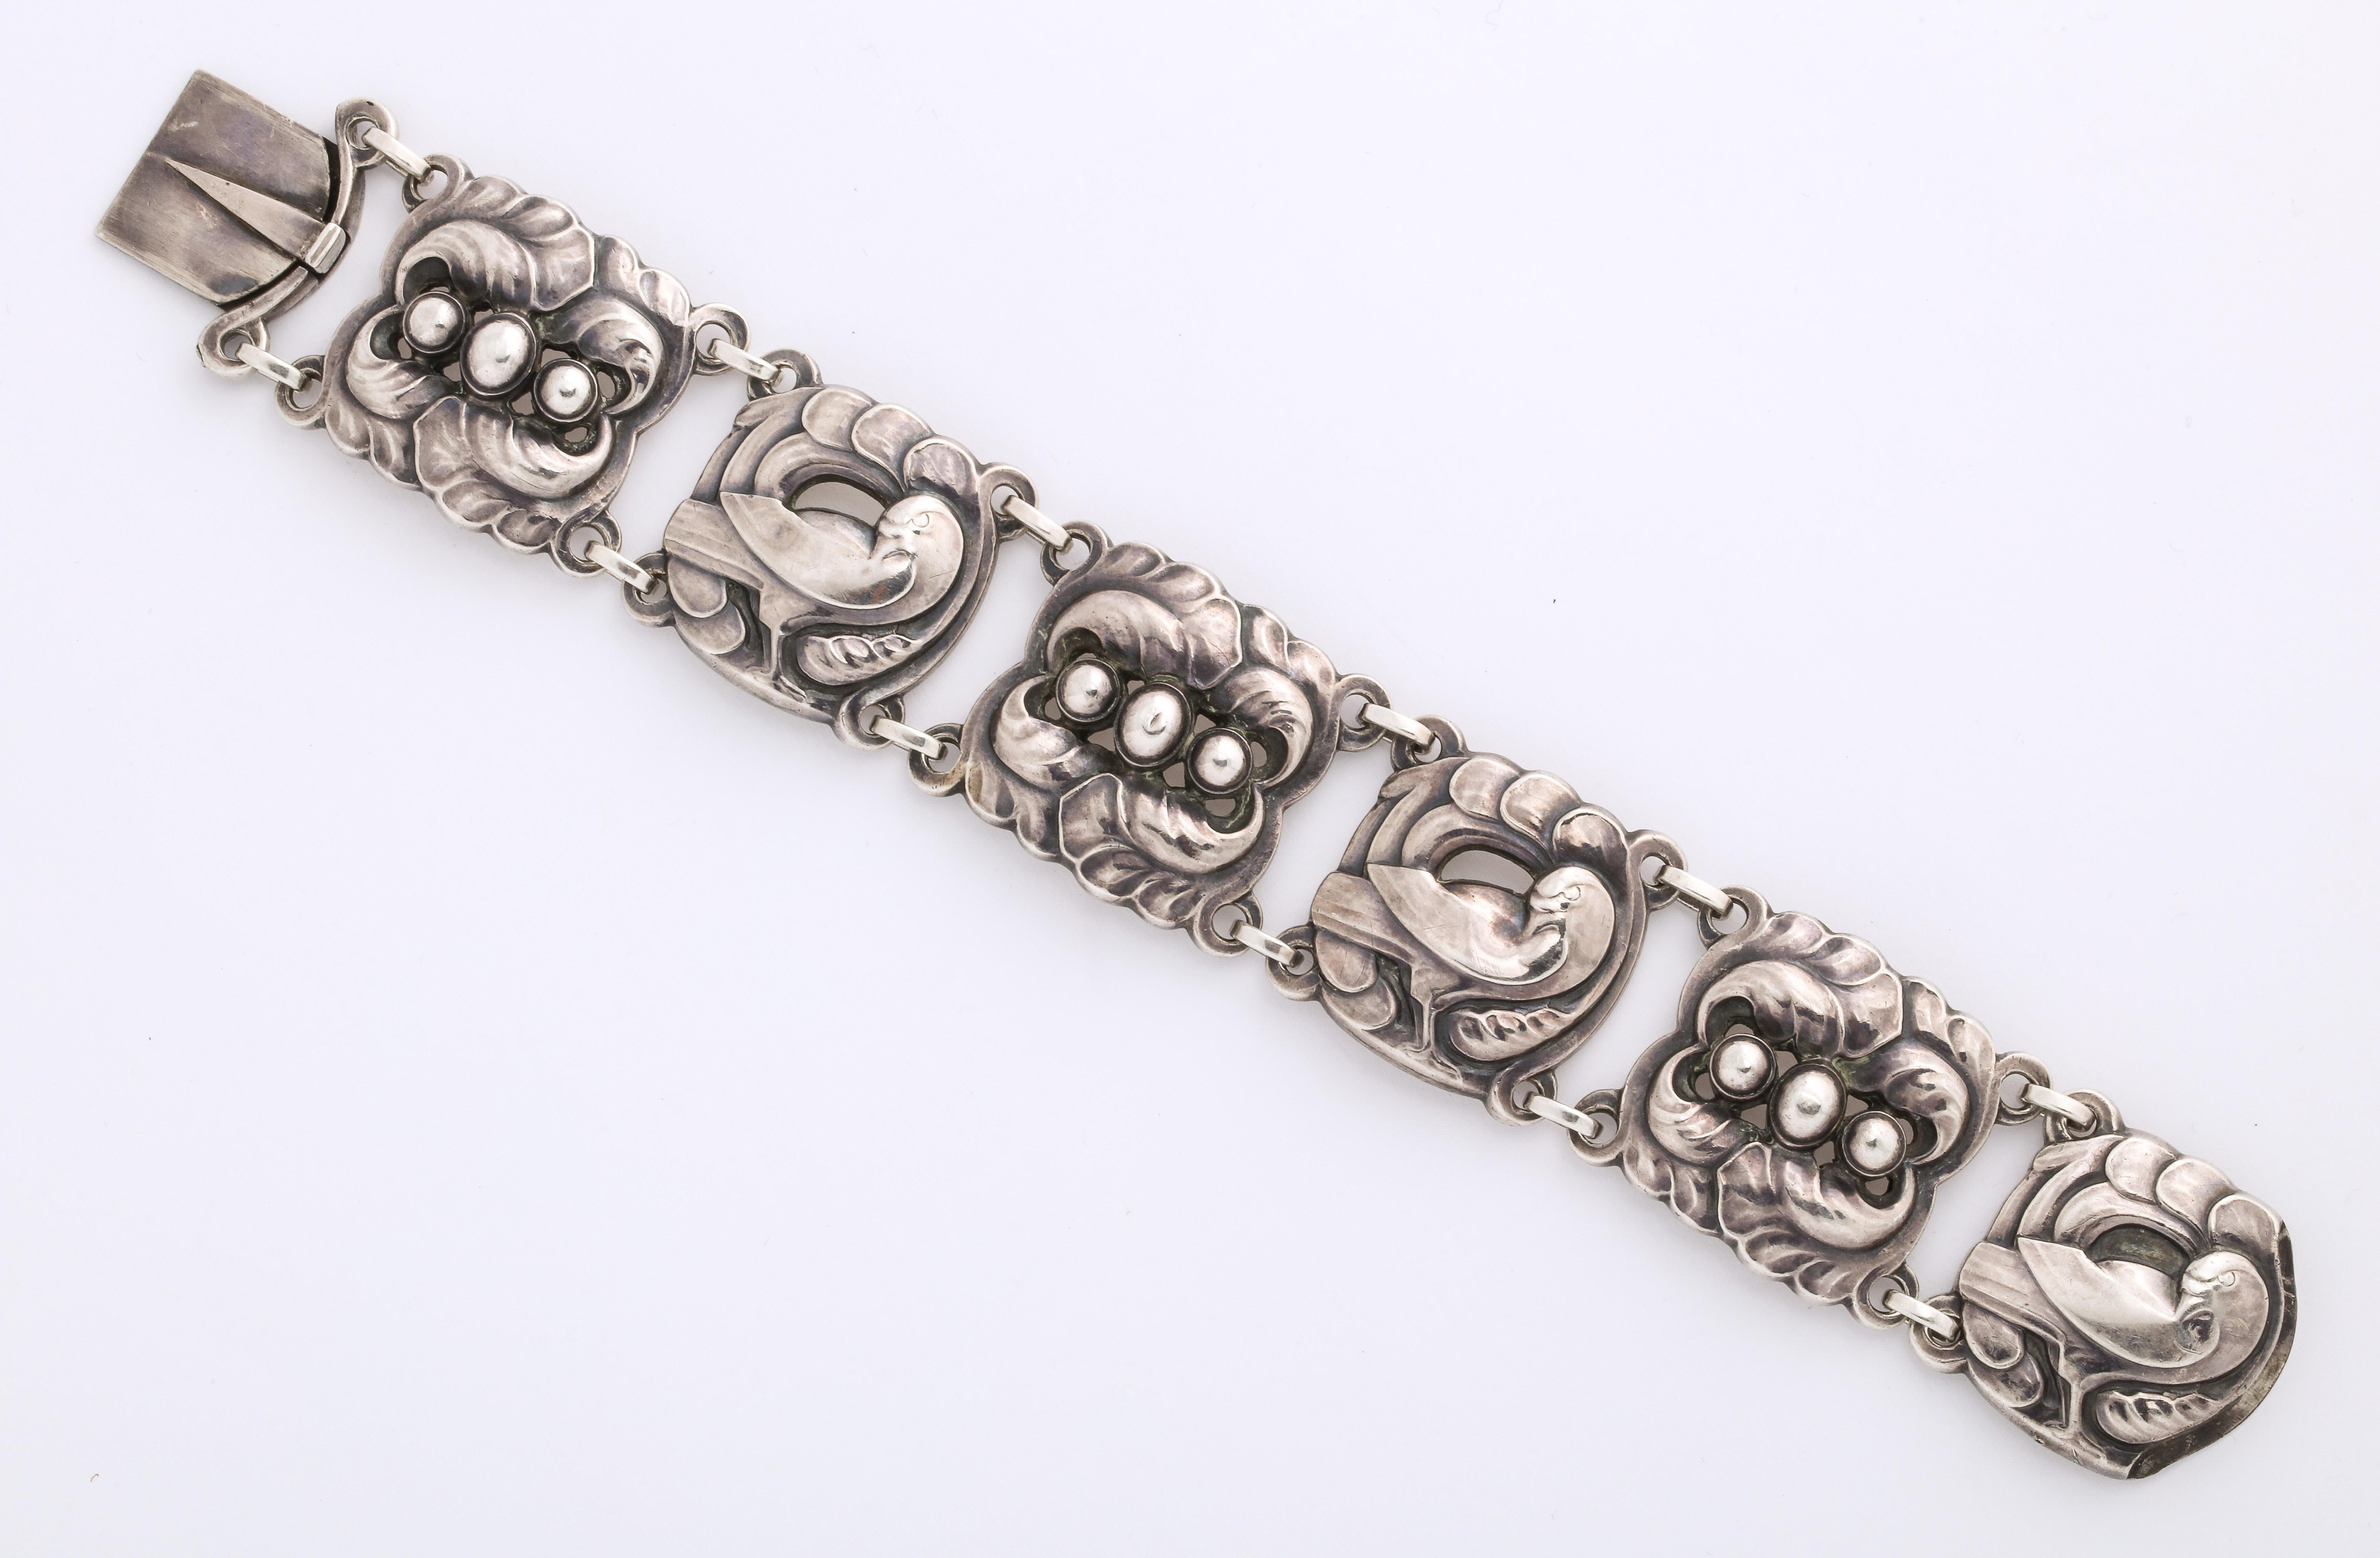 Isn't it lovely, a classic bracelet made by the internationally renowned Danish silversmith, Georg Jensen, c. 1933.. The bracelet, #32, can be seen in the Janet Drucker comprehensive reference book 